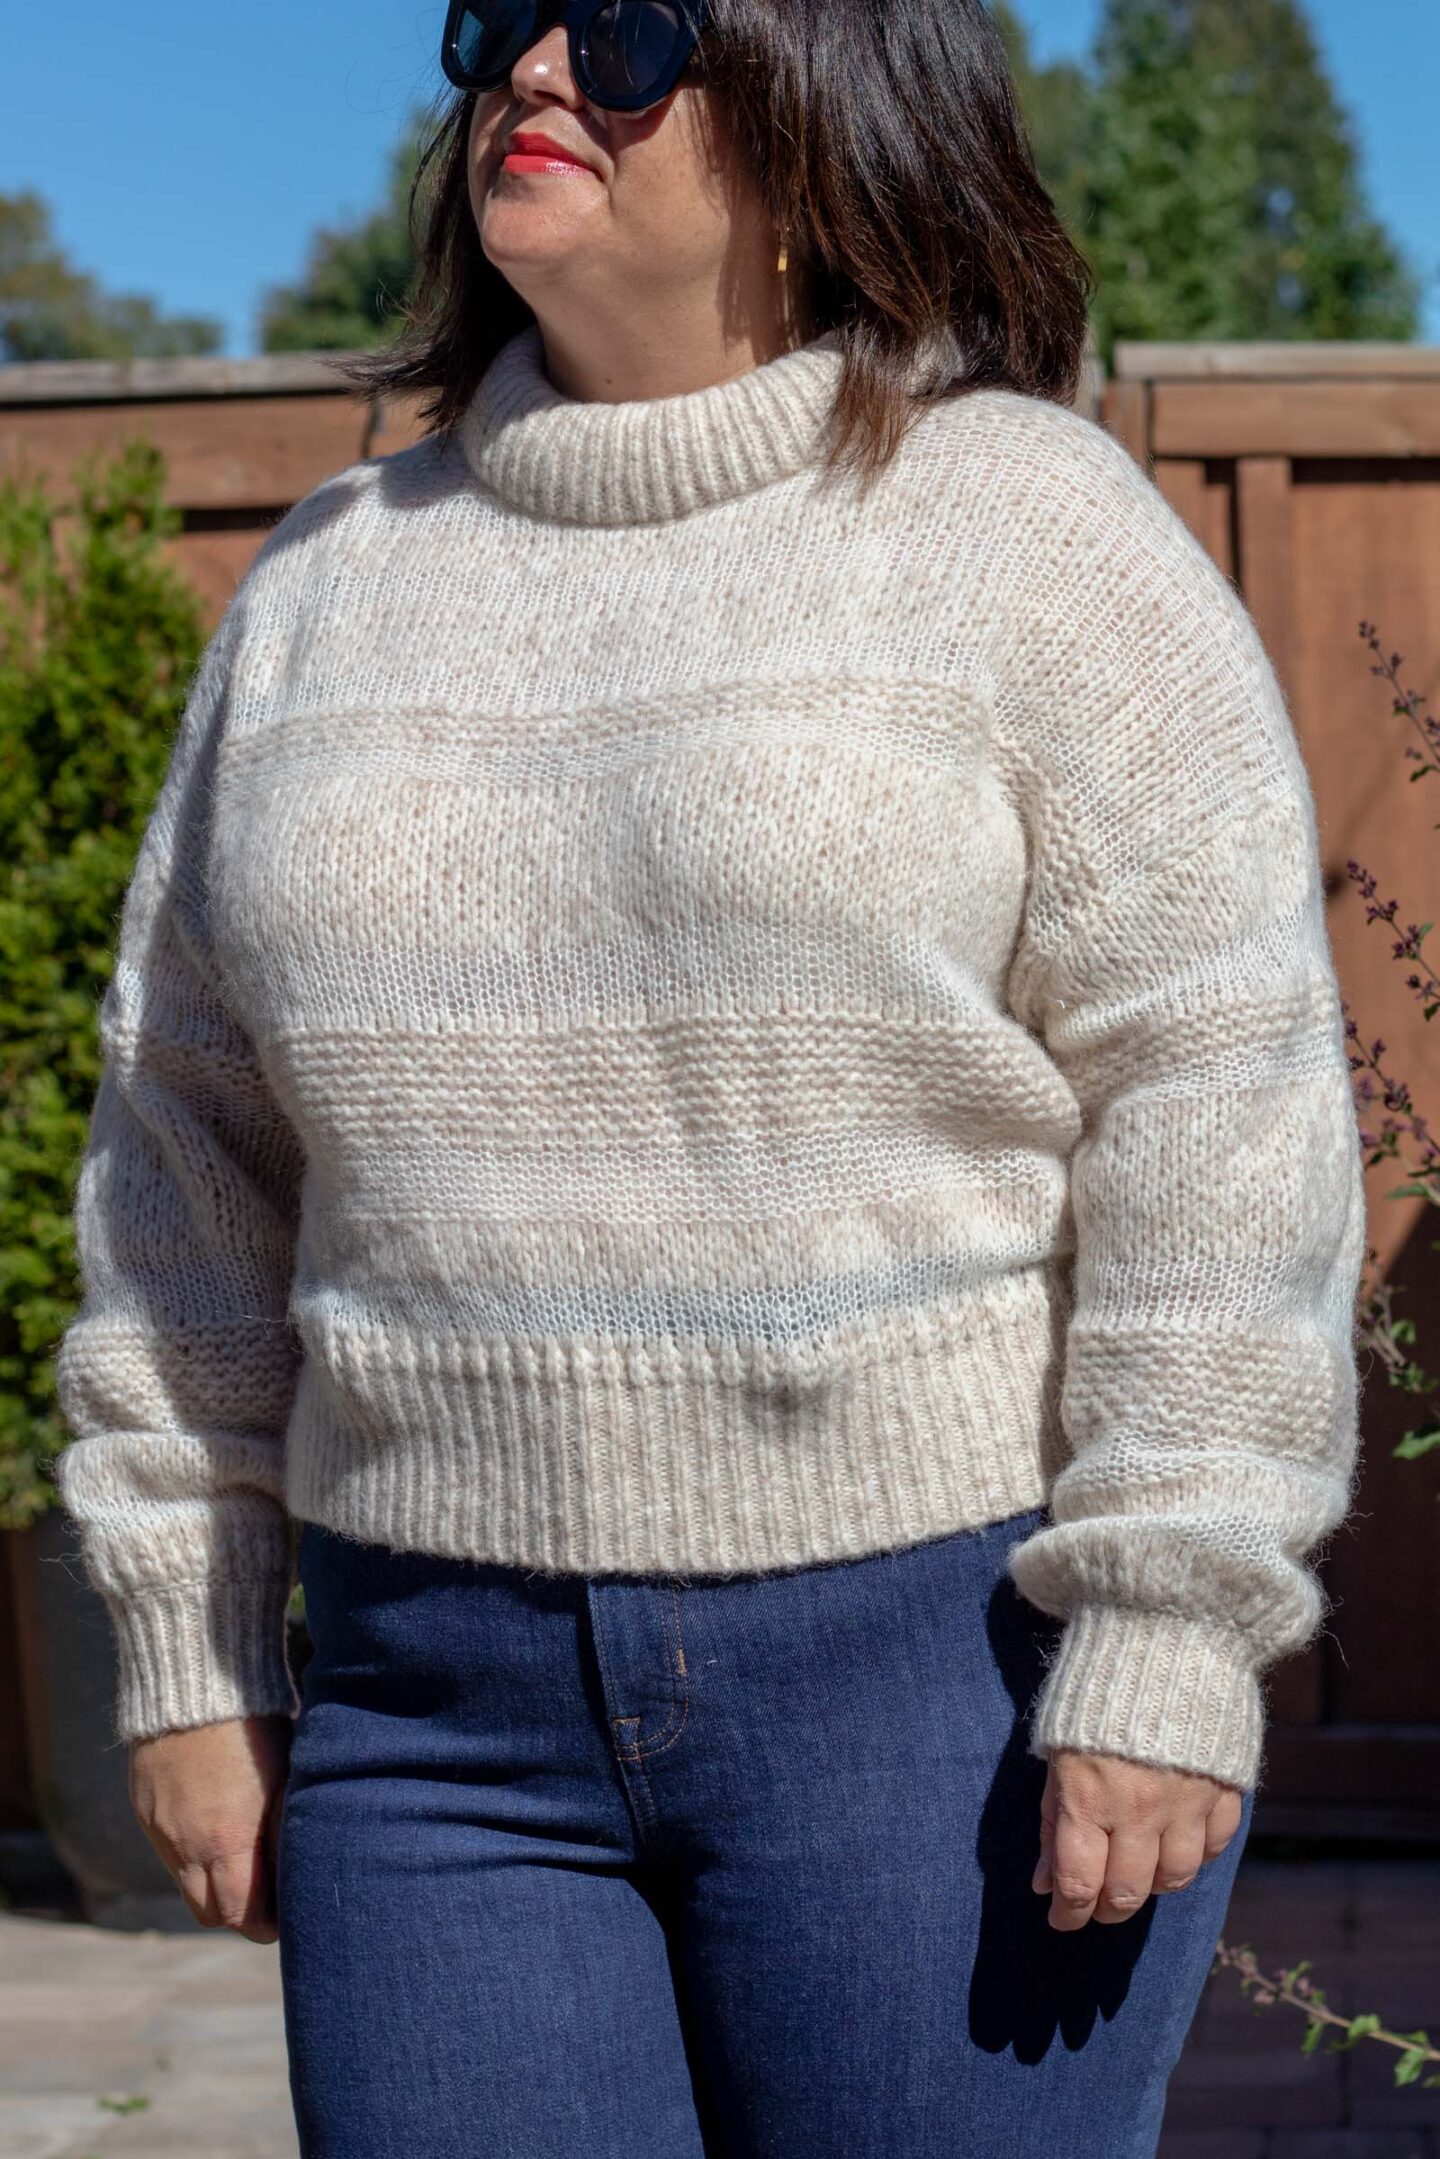 everlane puff sweater review